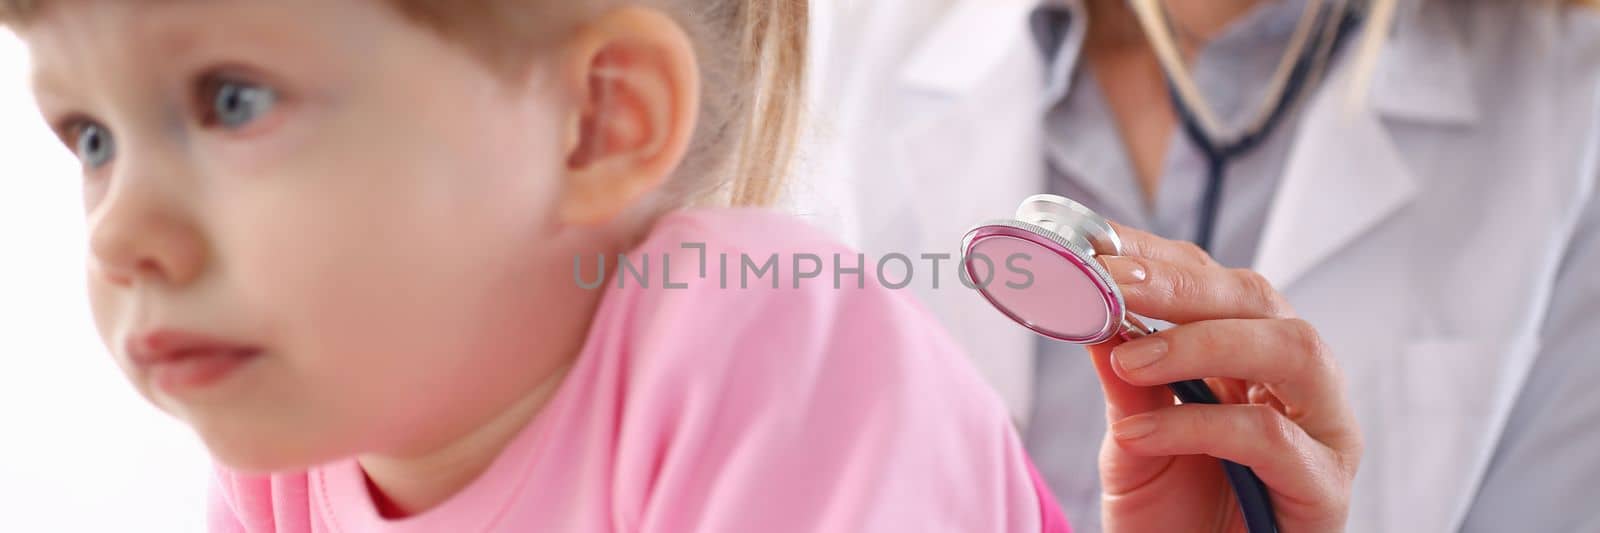 Pediatrician listens to lungs of small child girl with stethoscope by kuprevich